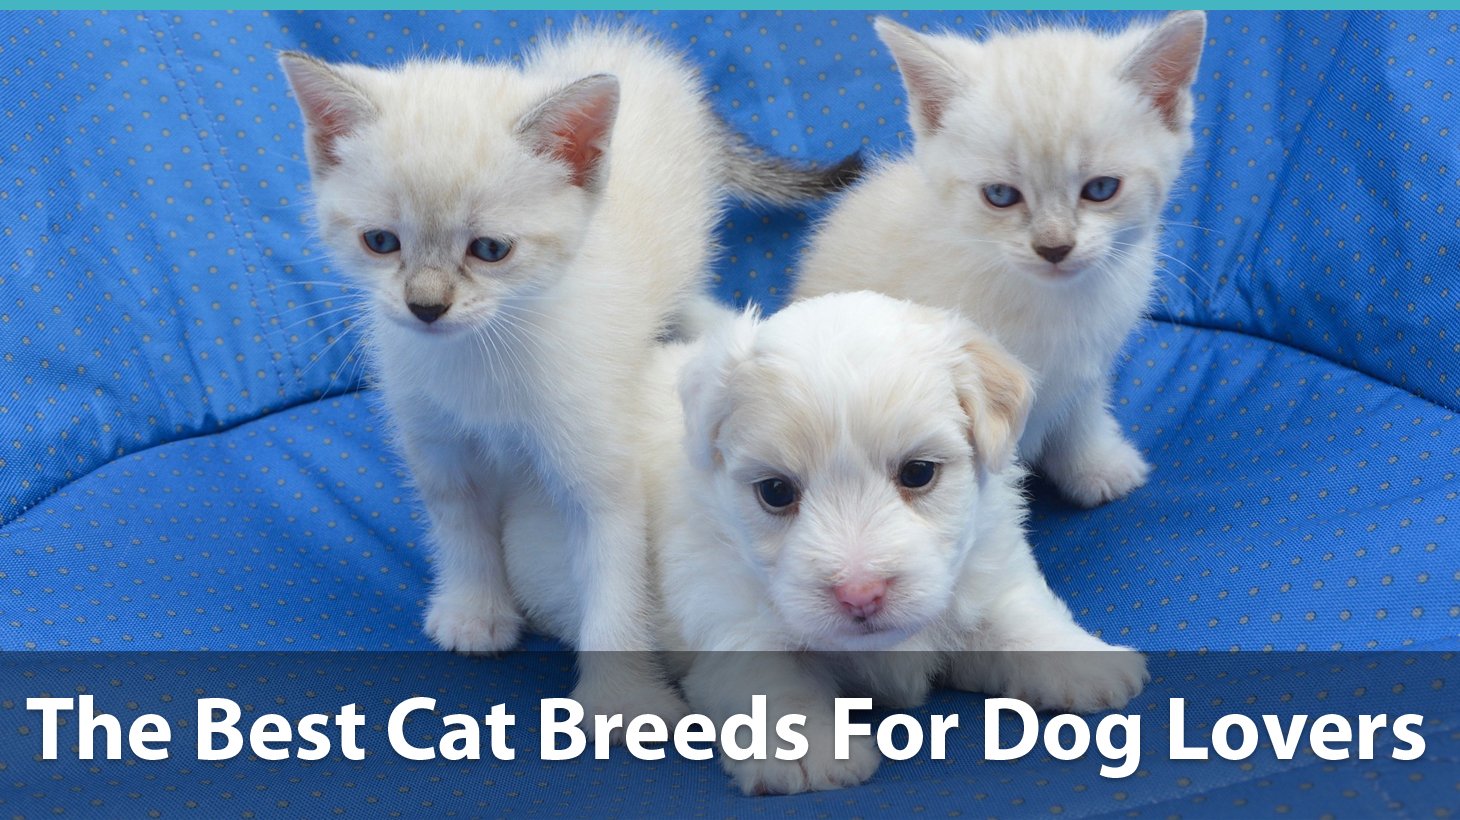 The Best Cat Breeds For Dogs And Dog Lovers